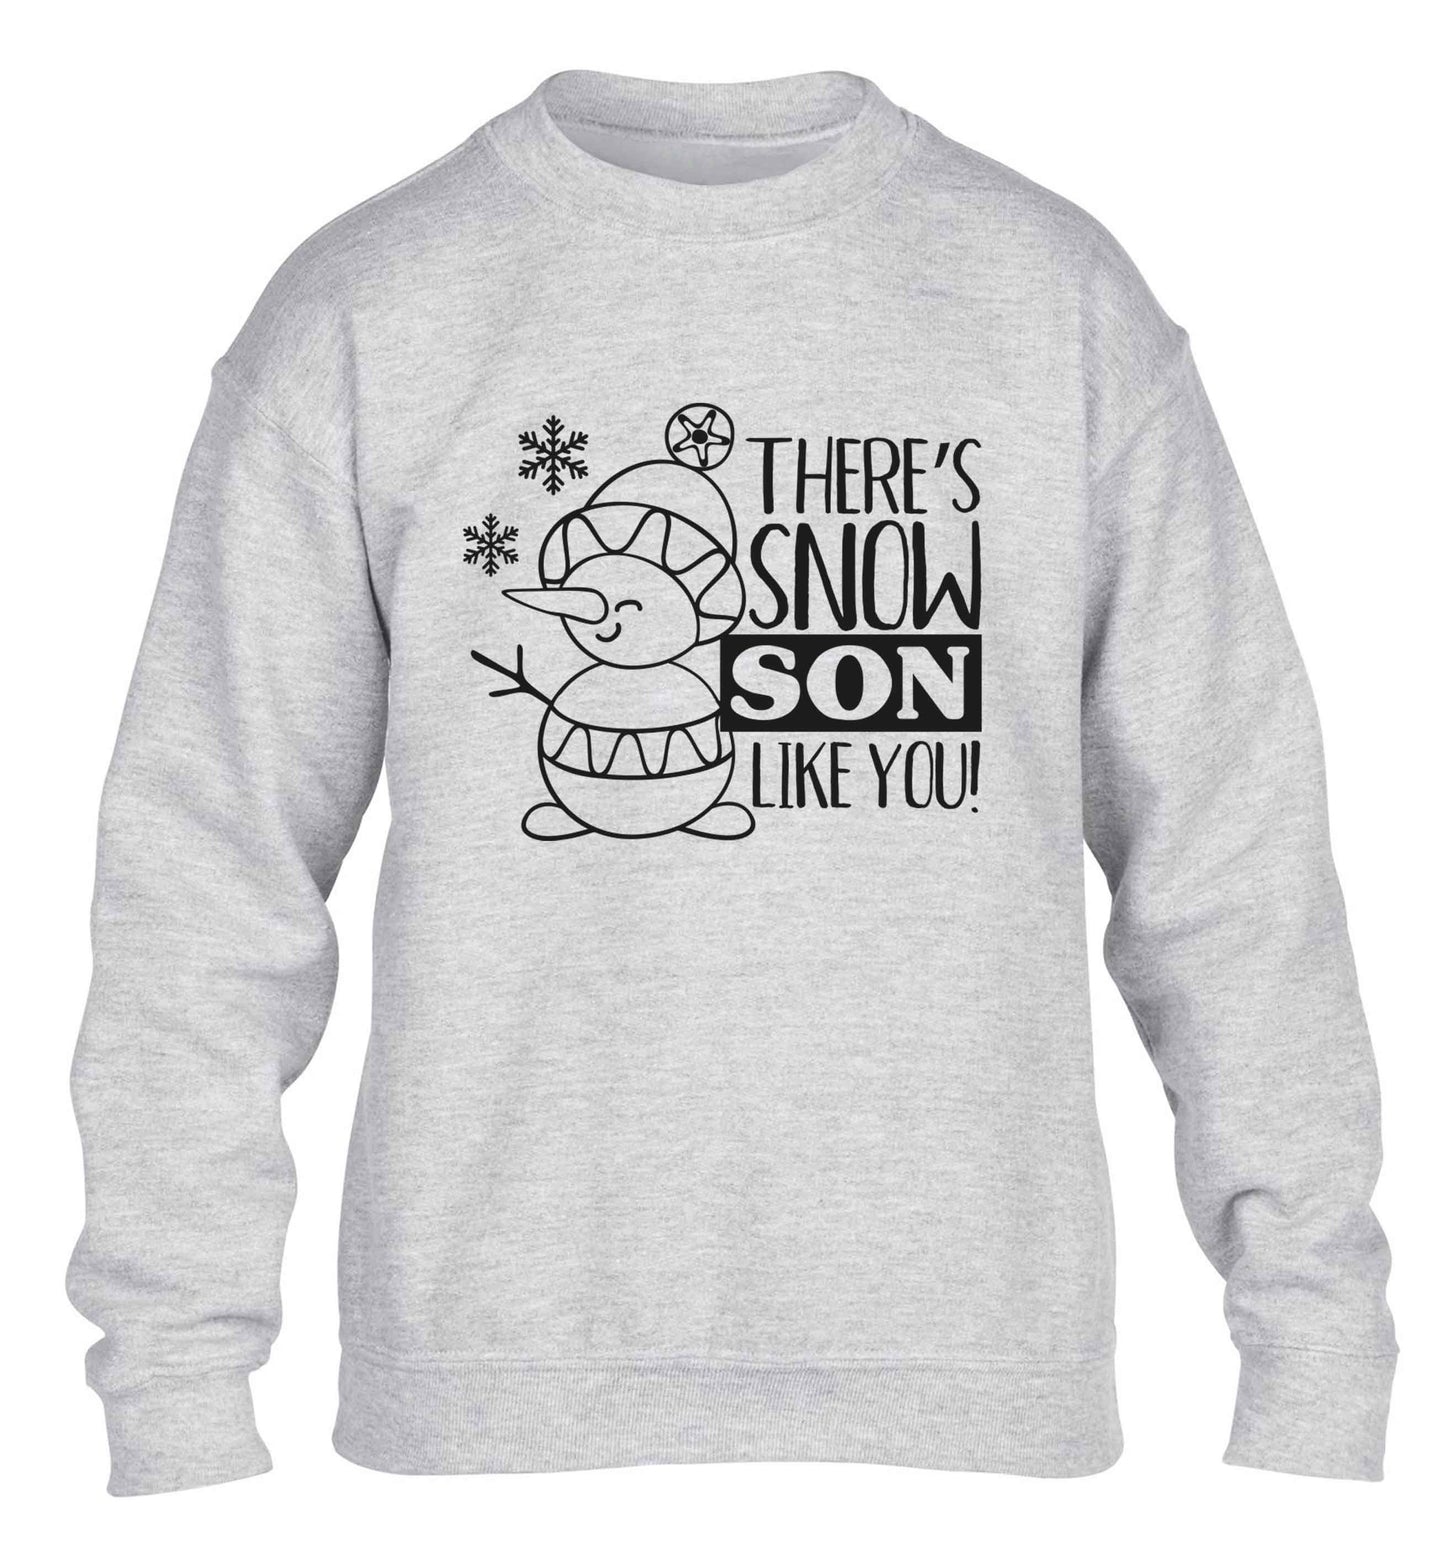 There's snow son like you children's grey sweater 12-13 Years